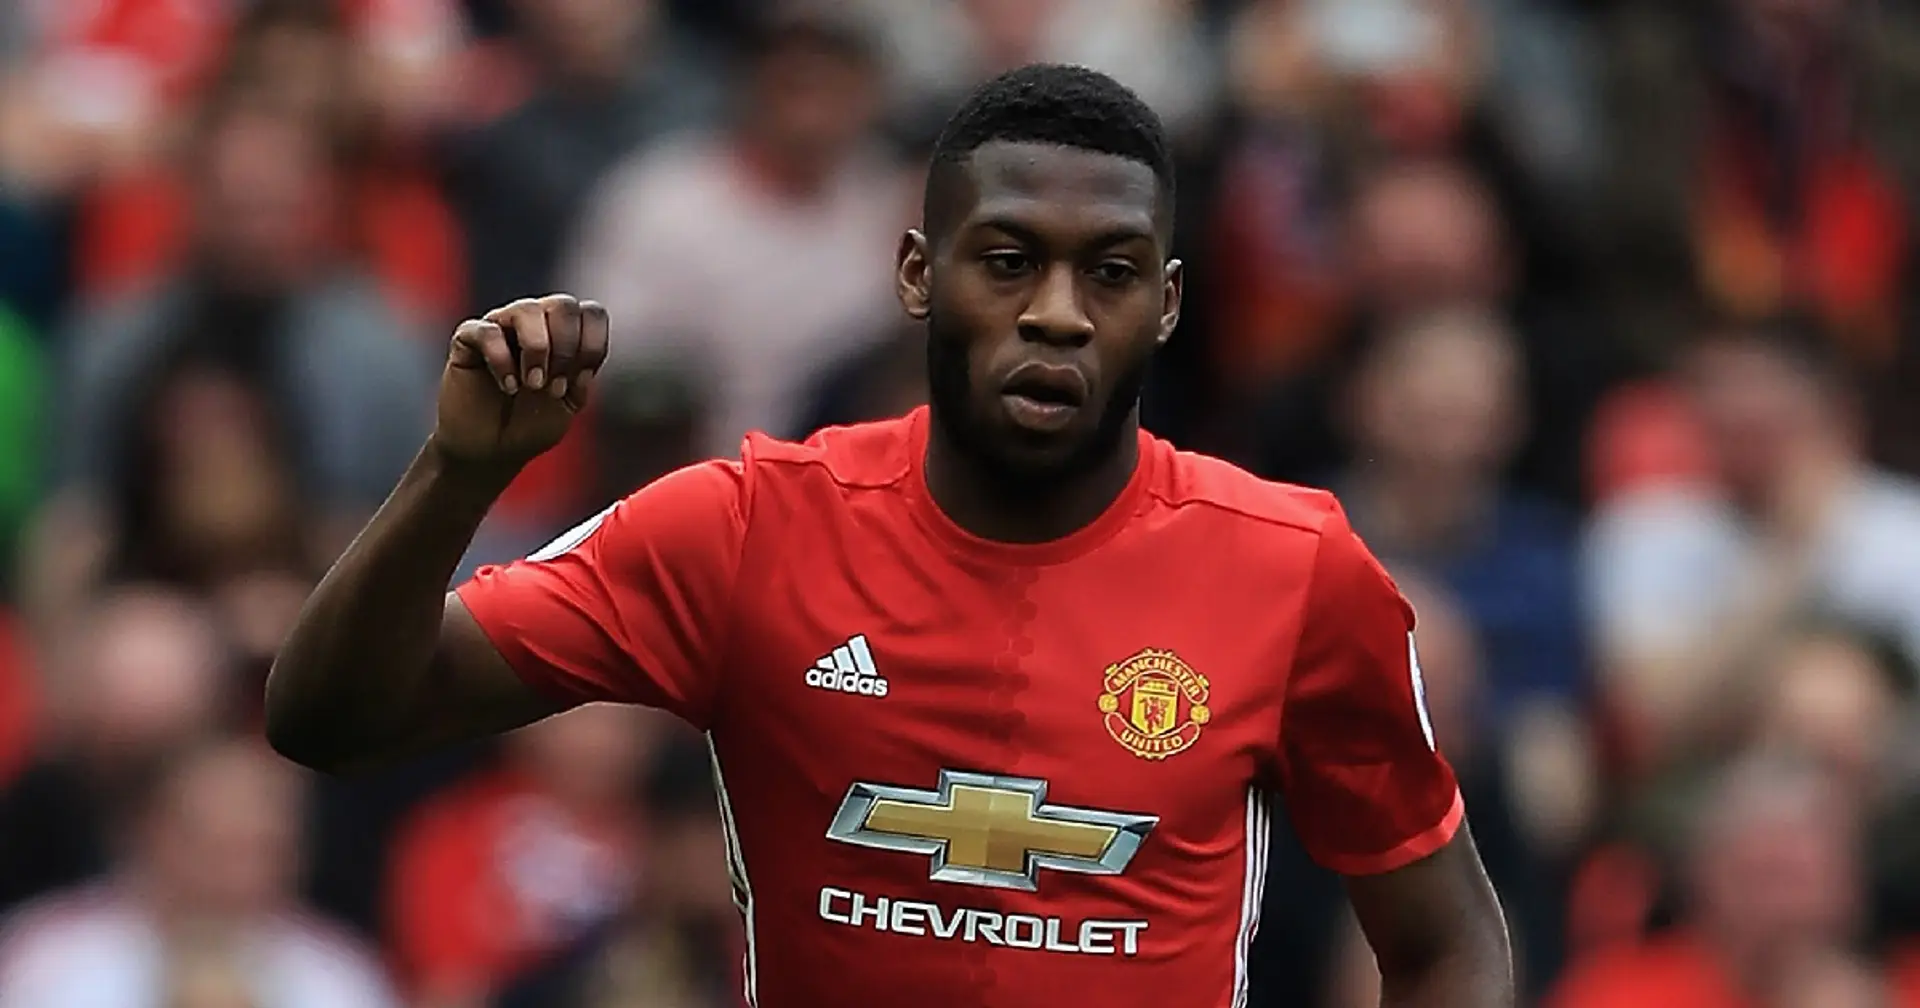 Man United to offer new contract to Timothy Fosu-Mensah: 4 positives we could expect